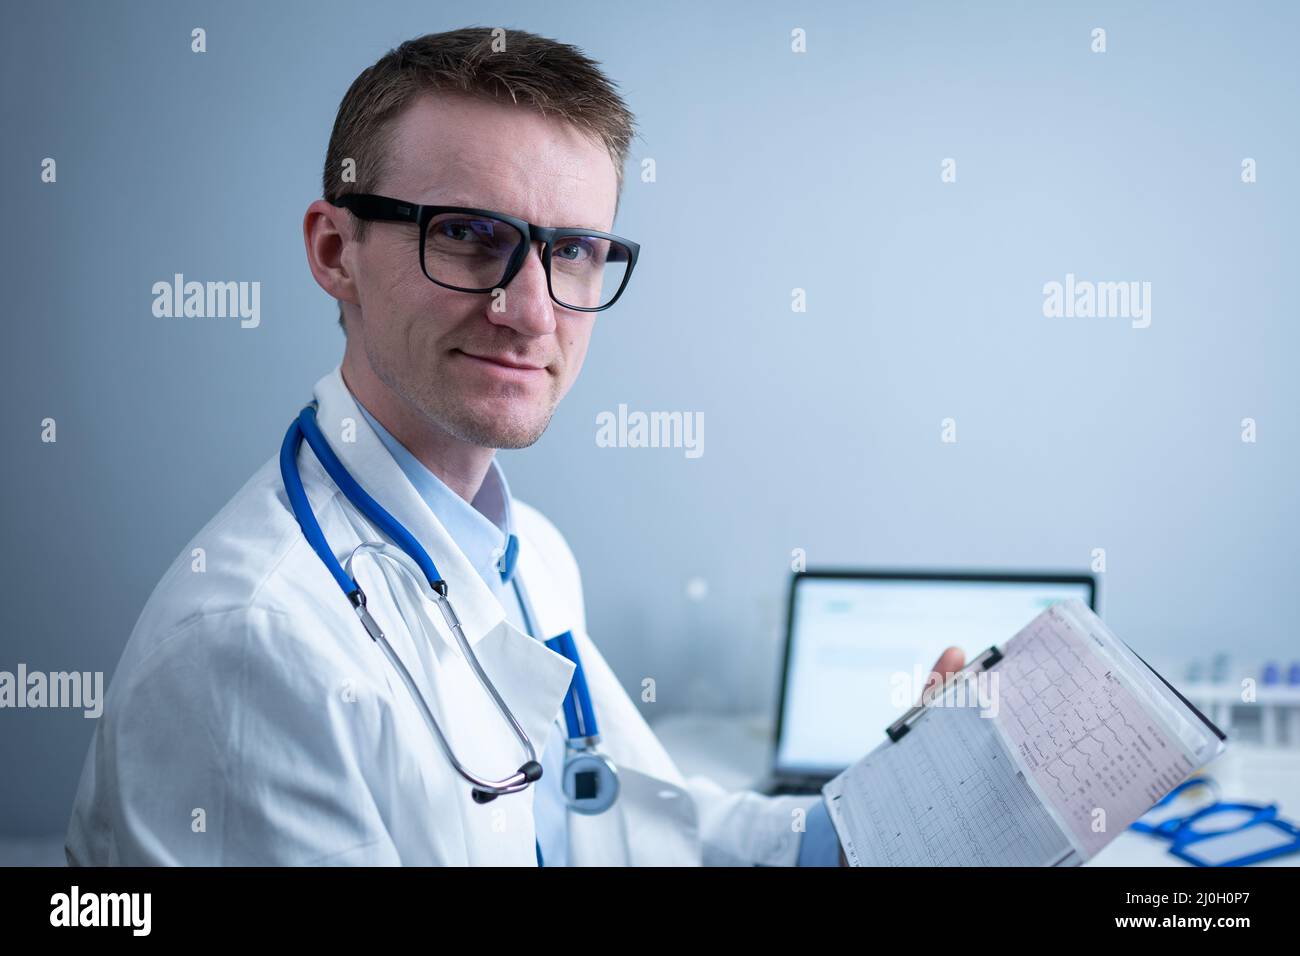 Topic of timely checking for heart disease. Heart disease myocardial infarction. Doctor analyzing electrocardiogram at the desk Stock Photo